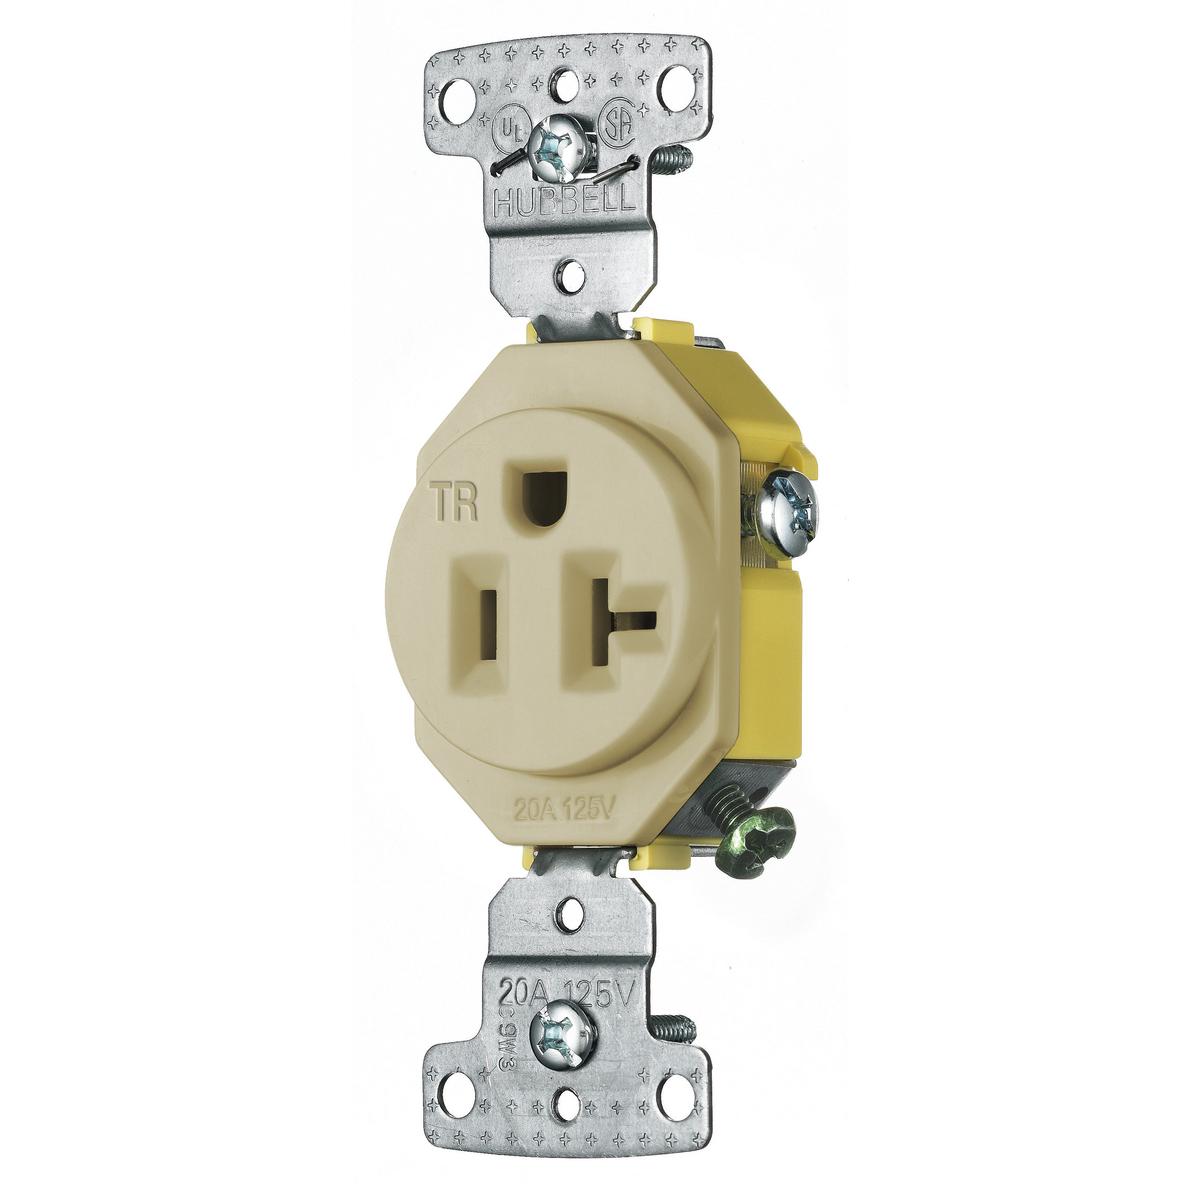 Hubbell RR201ITR TradeSelect, Straight Blade Devices, Residential Grade, Receptacles, Tamper Resistant Single, 20A 125V, 2- Pole 3-Wire Grounding, 5-20R, Self Grounding, Ivory  ; Smooth indented face appearance ; Multiple-drive Slot/Phillips/Robertson head screws ; Tough 